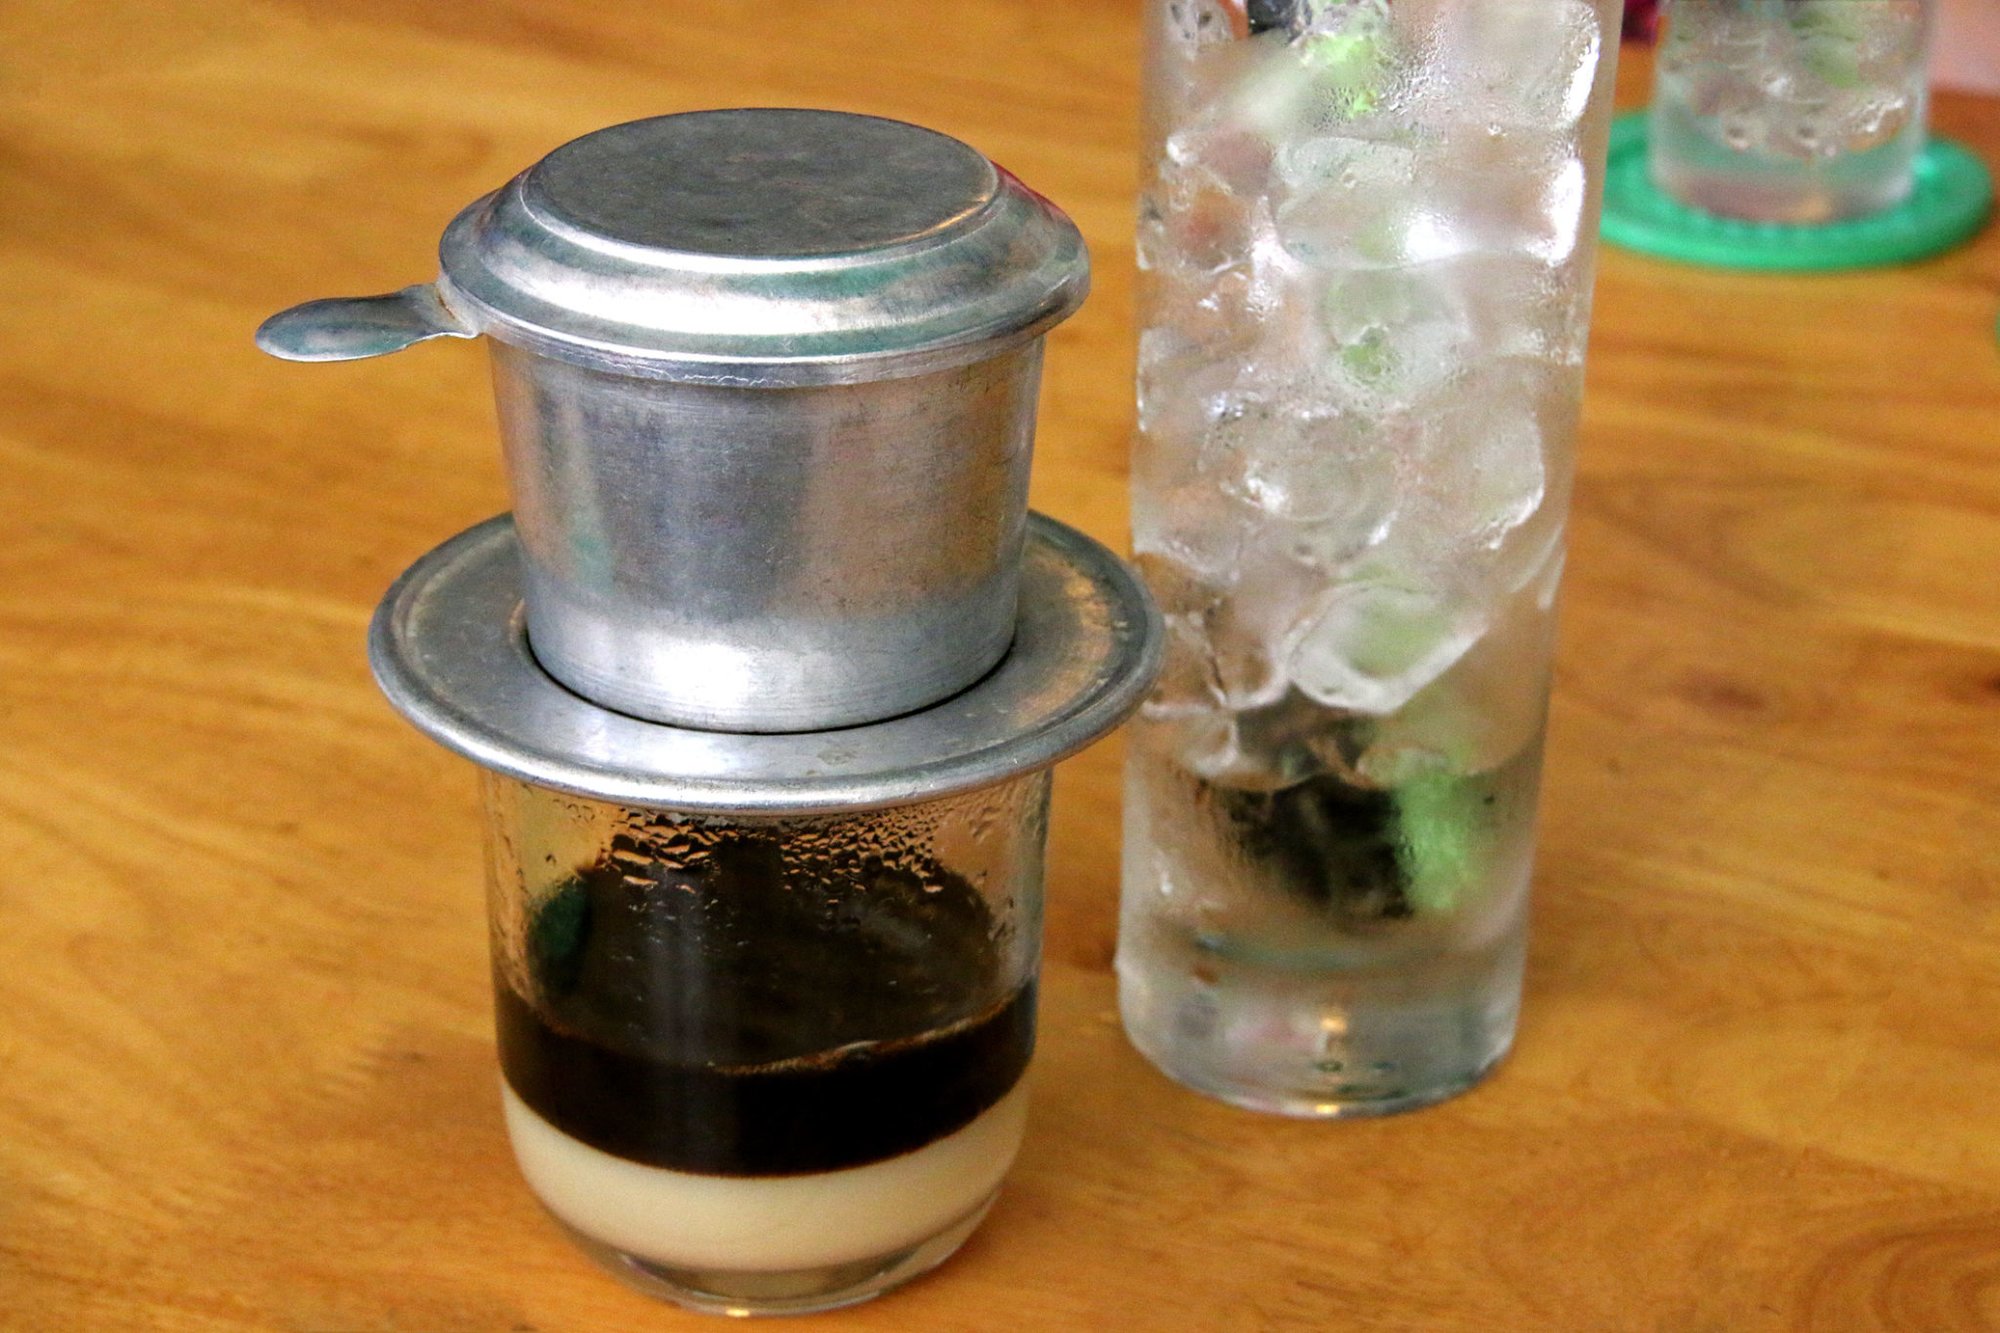 A Vietnamese iced coffee brewing through a filter. Photo via Getty Images.